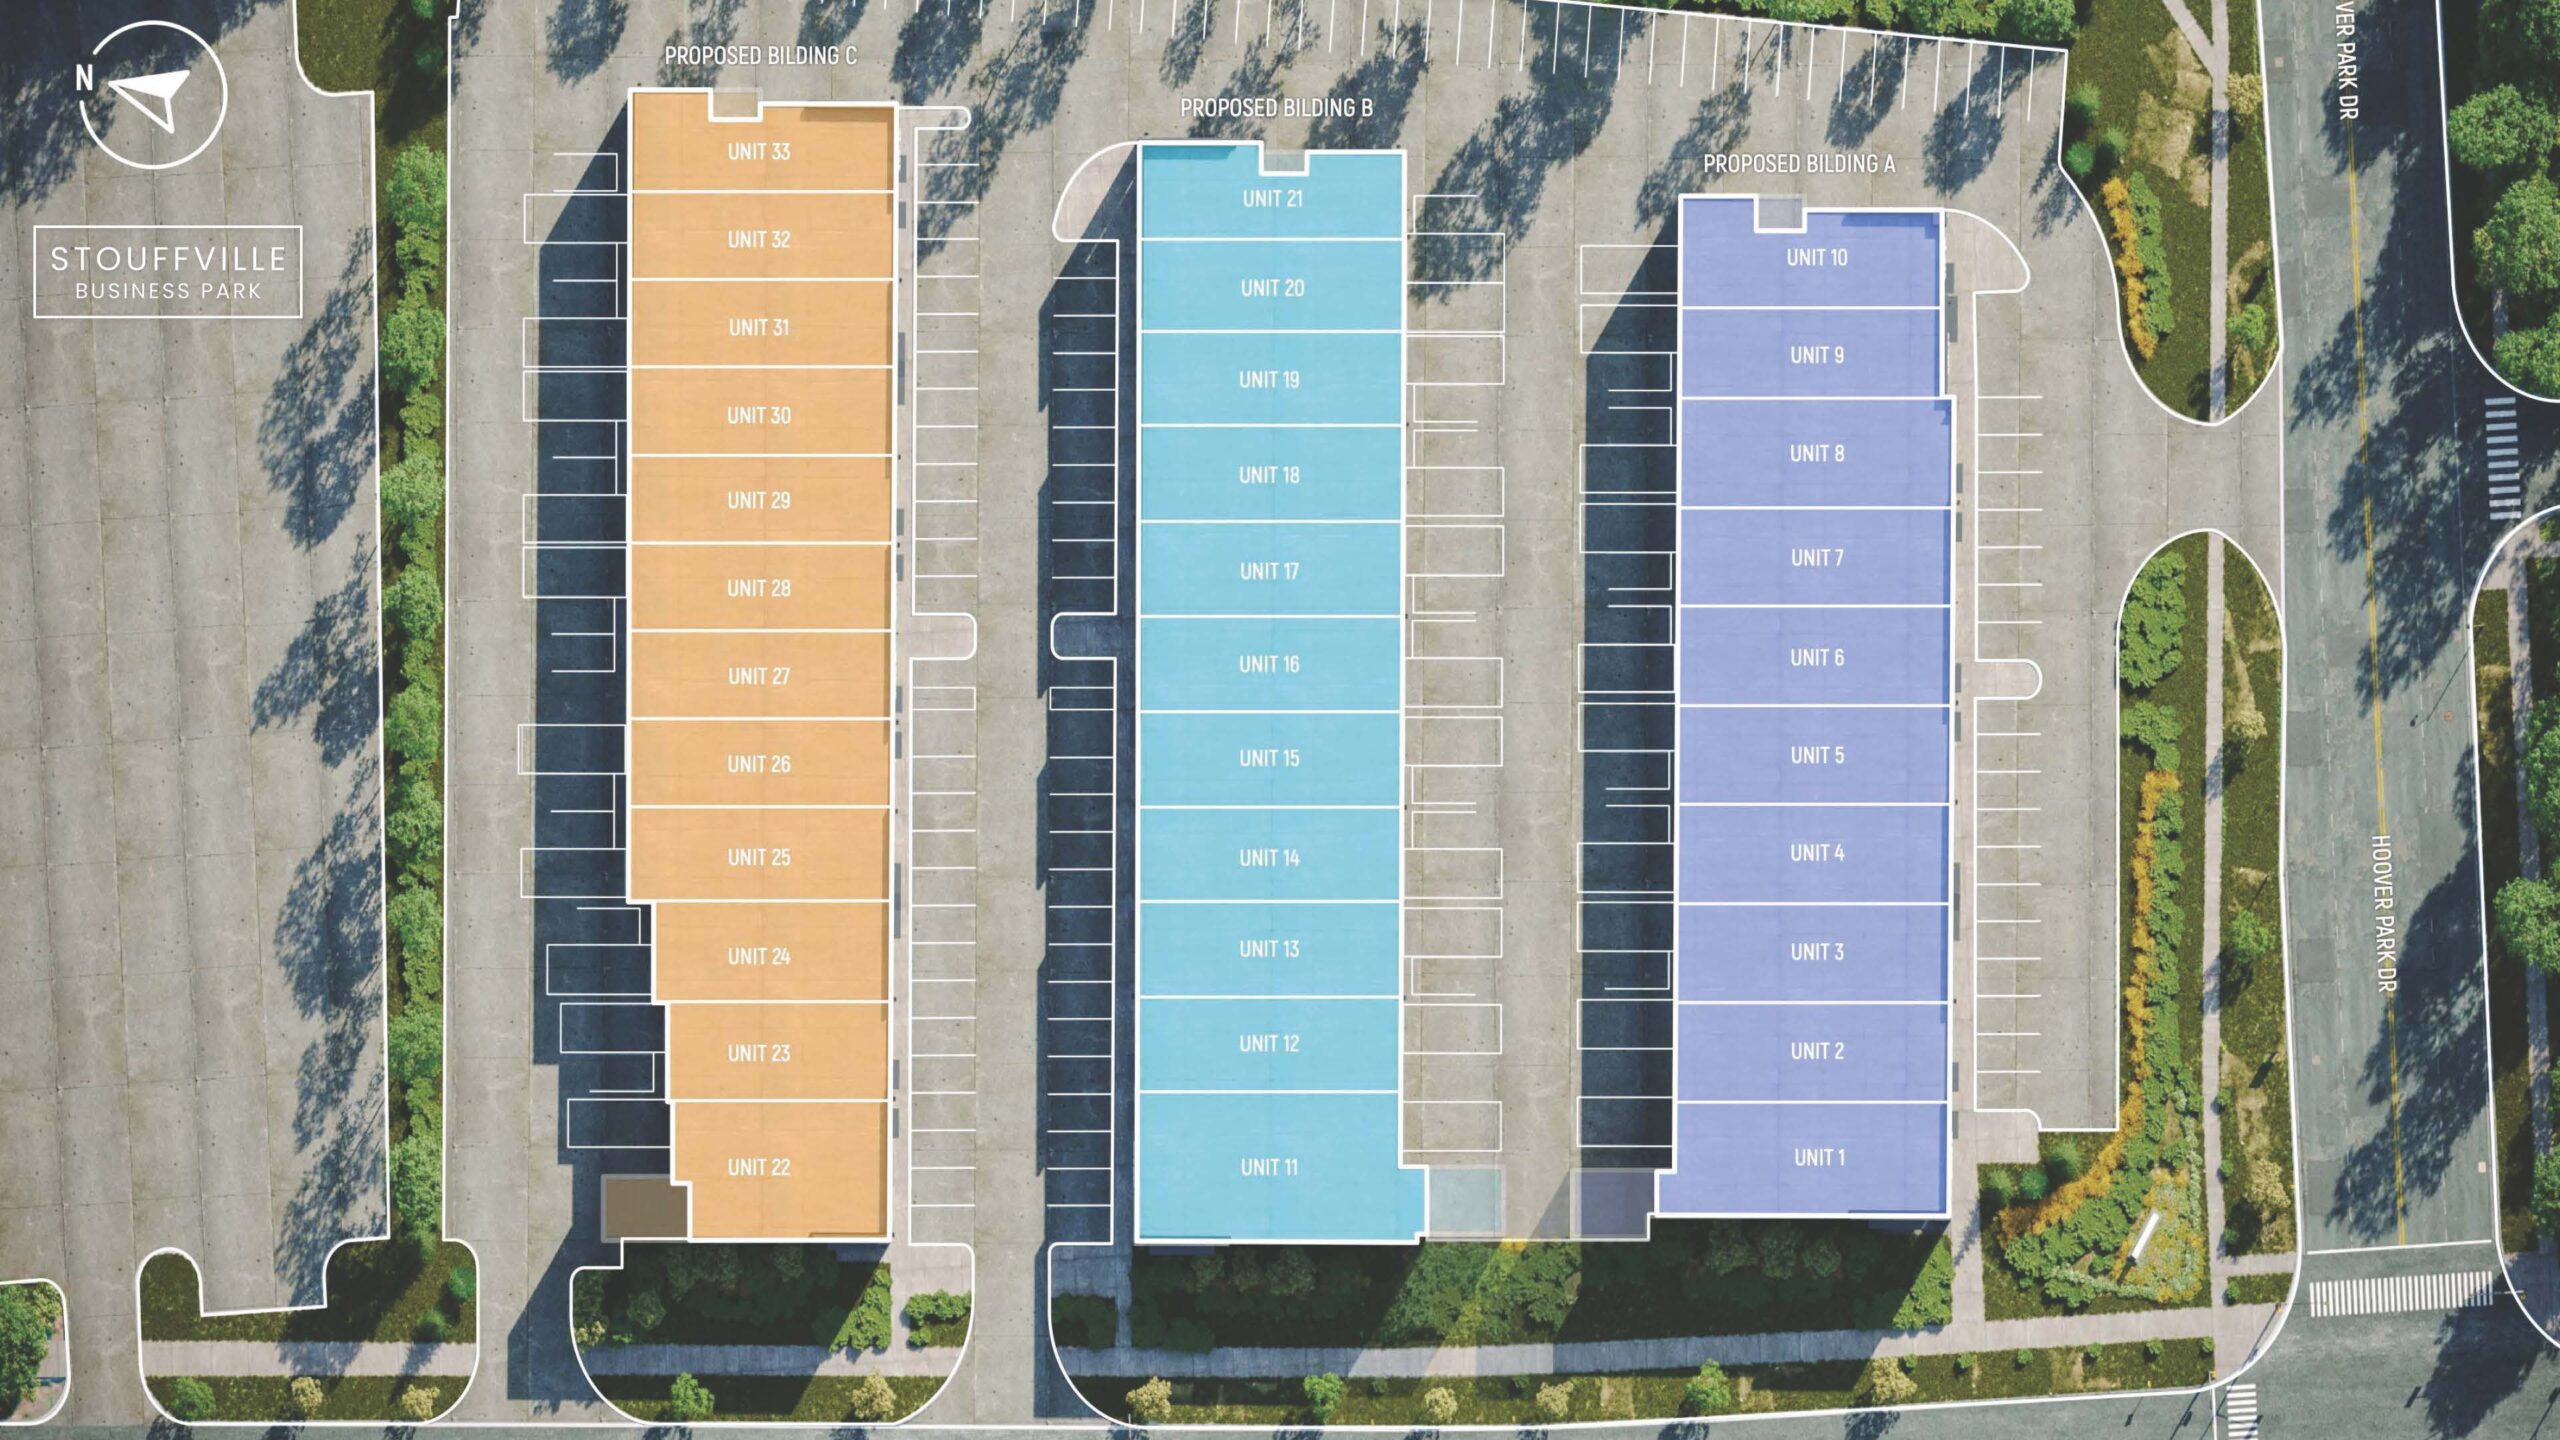 Aerial layout of Stouffville Business Park units.